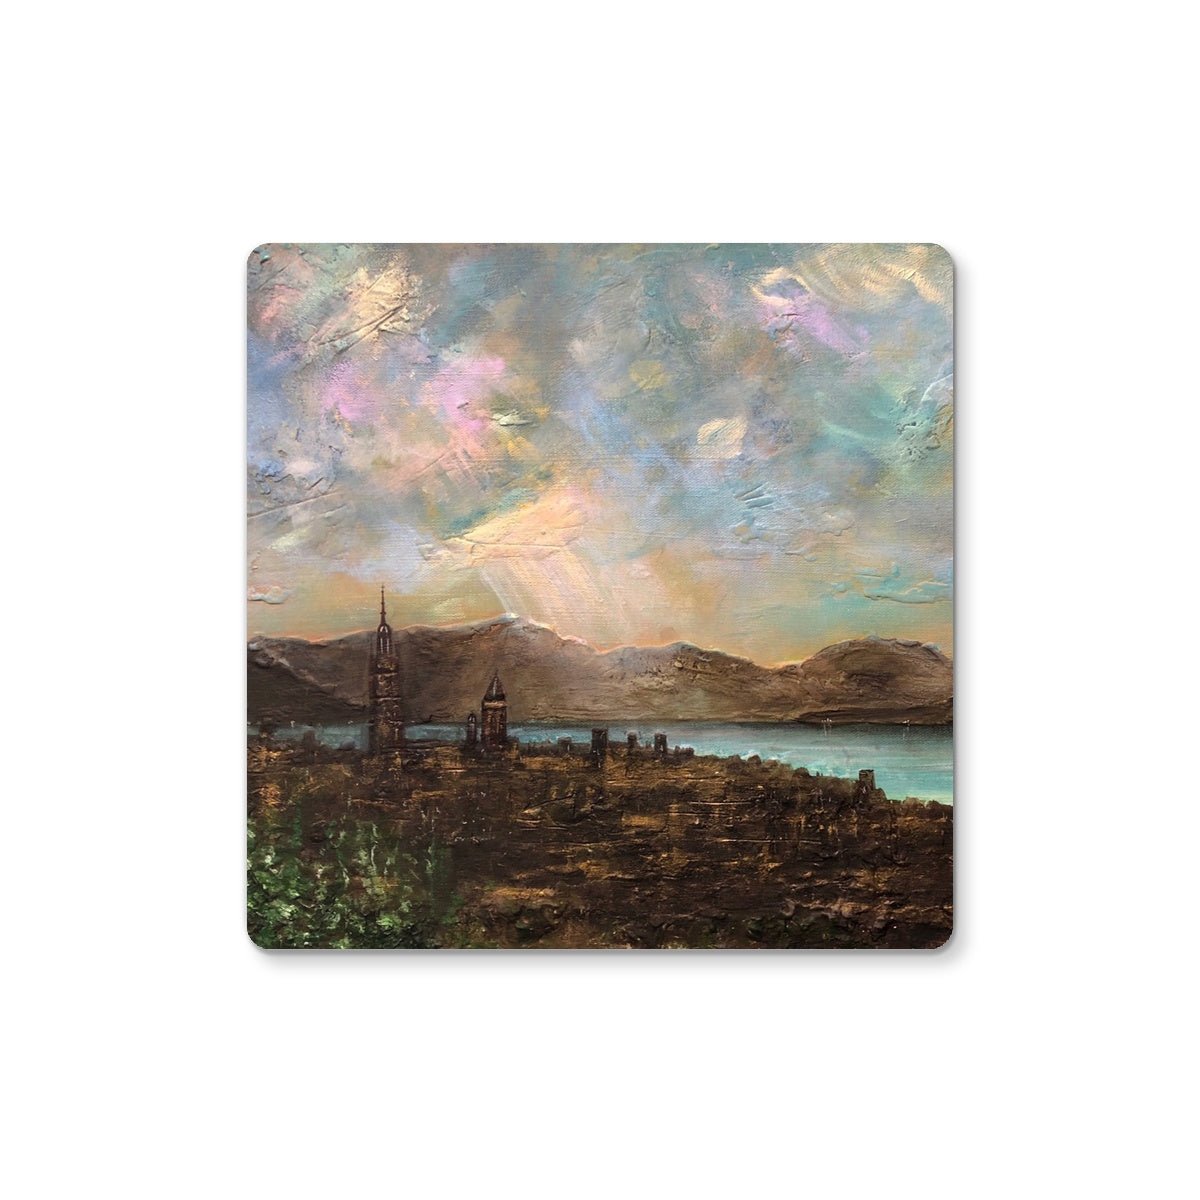 Angels Fingers Over Greenock Art Gifts Coaster-Coasters-River Clyde Art Gallery-4 Coasters-Paintings, Prints, Homeware, Art Gifts From Scotland By Scottish Artist Kevin Hunter